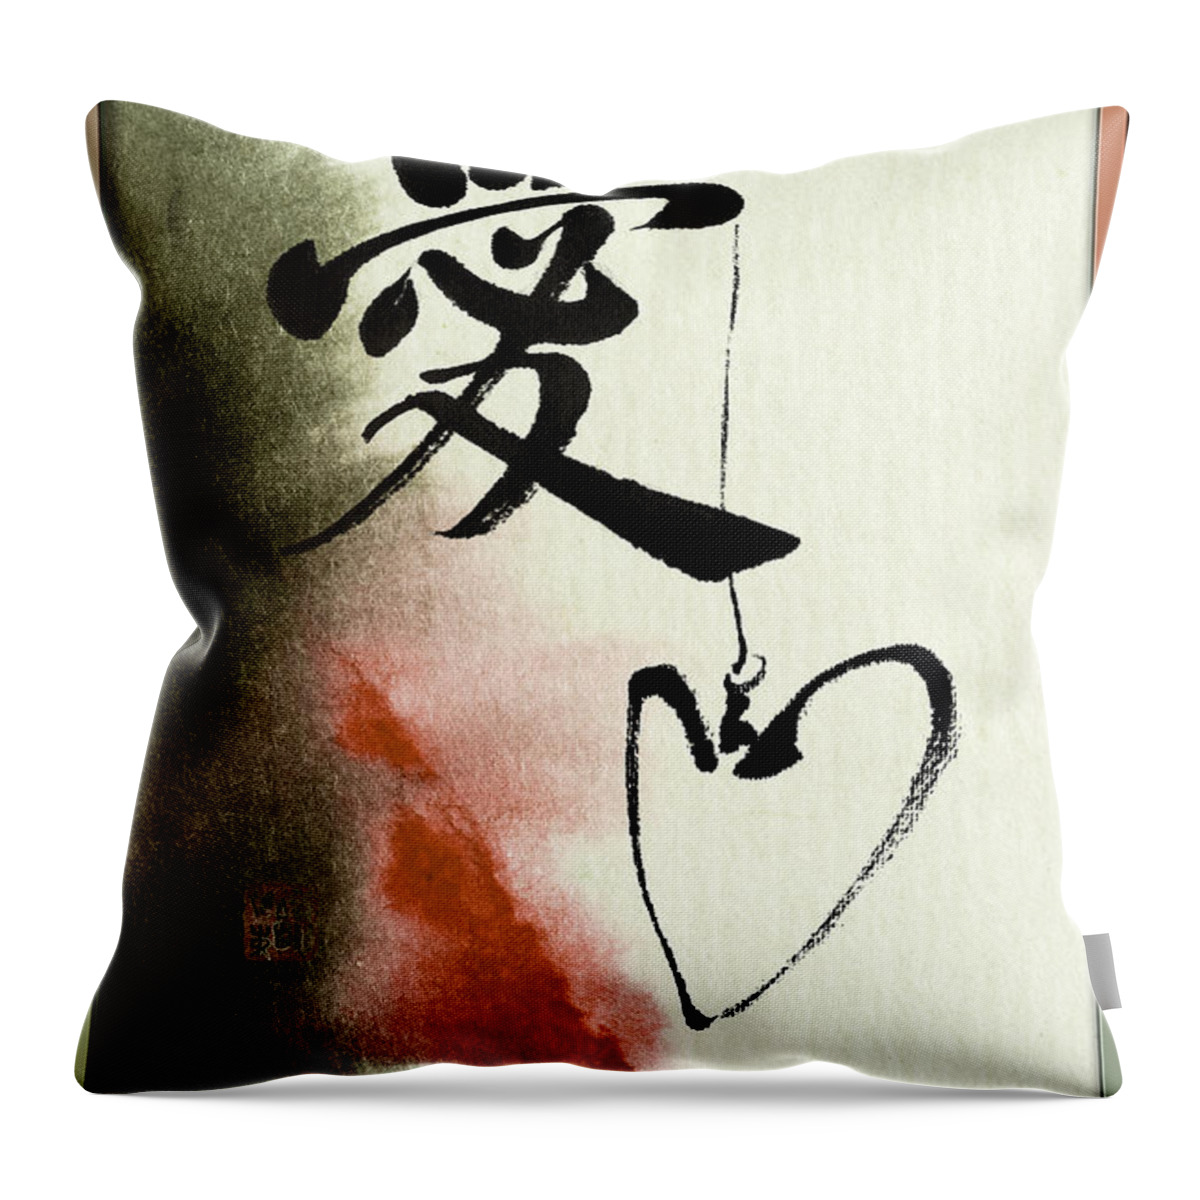 Love Throw Pillow featuring the mixed media Love brush calligraphy with heart by Peter V Quenter